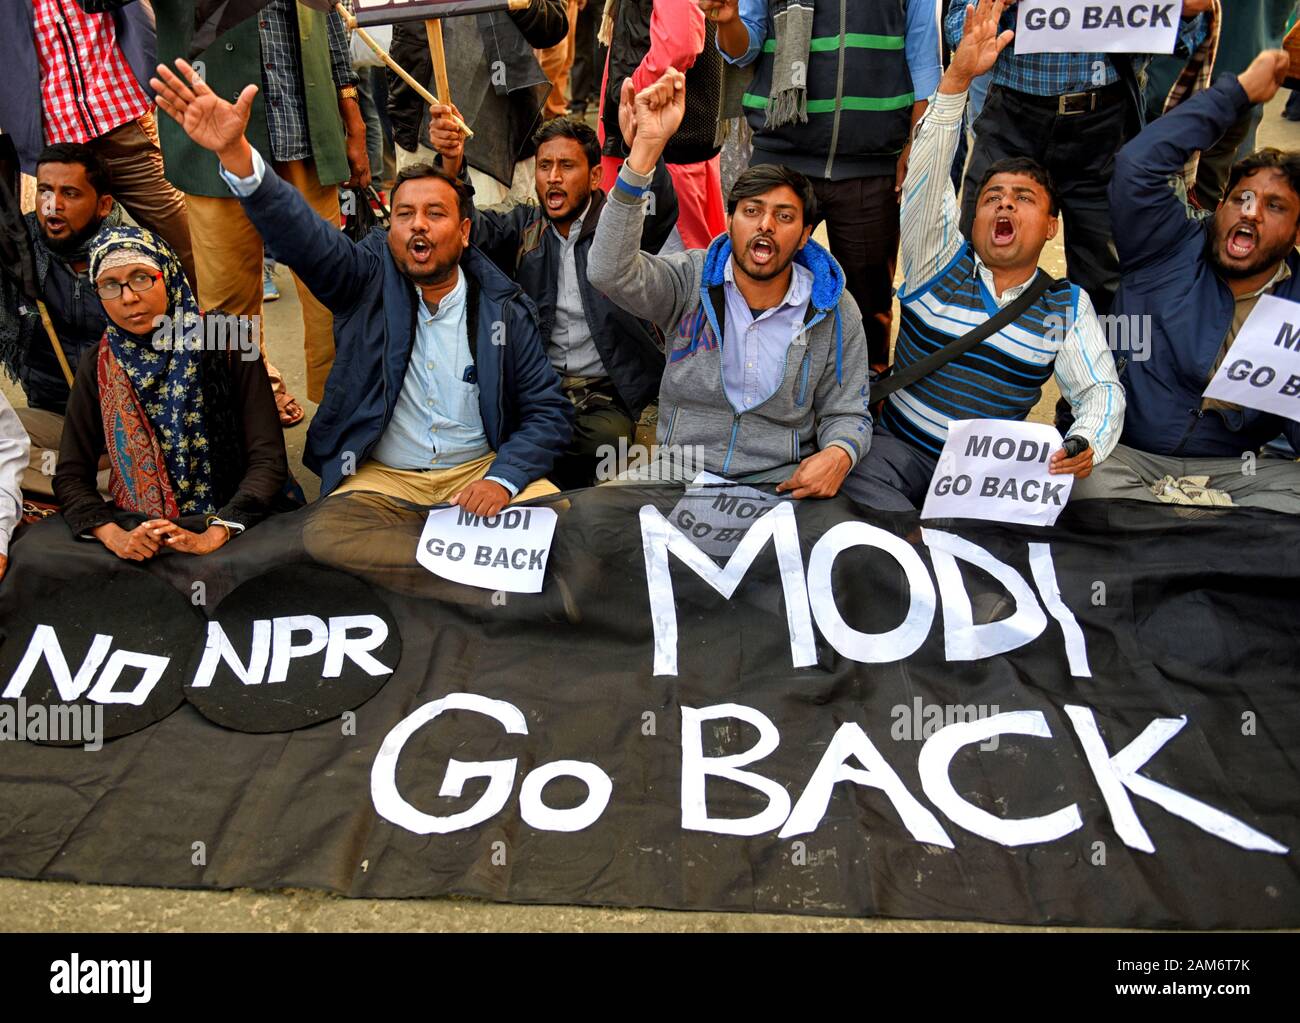 Kolkata, India. 11th Jan, 2019. Protesters hold placards while chanting slogans during the demonstration.Demonstration against the visit of India's Prime Minister Narendra Modi and also against (Citizenship Amendment Bill) or CAB which grants Indian citizenship to non-Muslims of Afghanistan, Pakistan and Bangladesh that was passed by the Indian Government in December 2019 and has created violence, strike and protest all over the India. Credit: Avishek Das/SOPA Images/ZUMA Wire/Alamy Live News Stock Photo